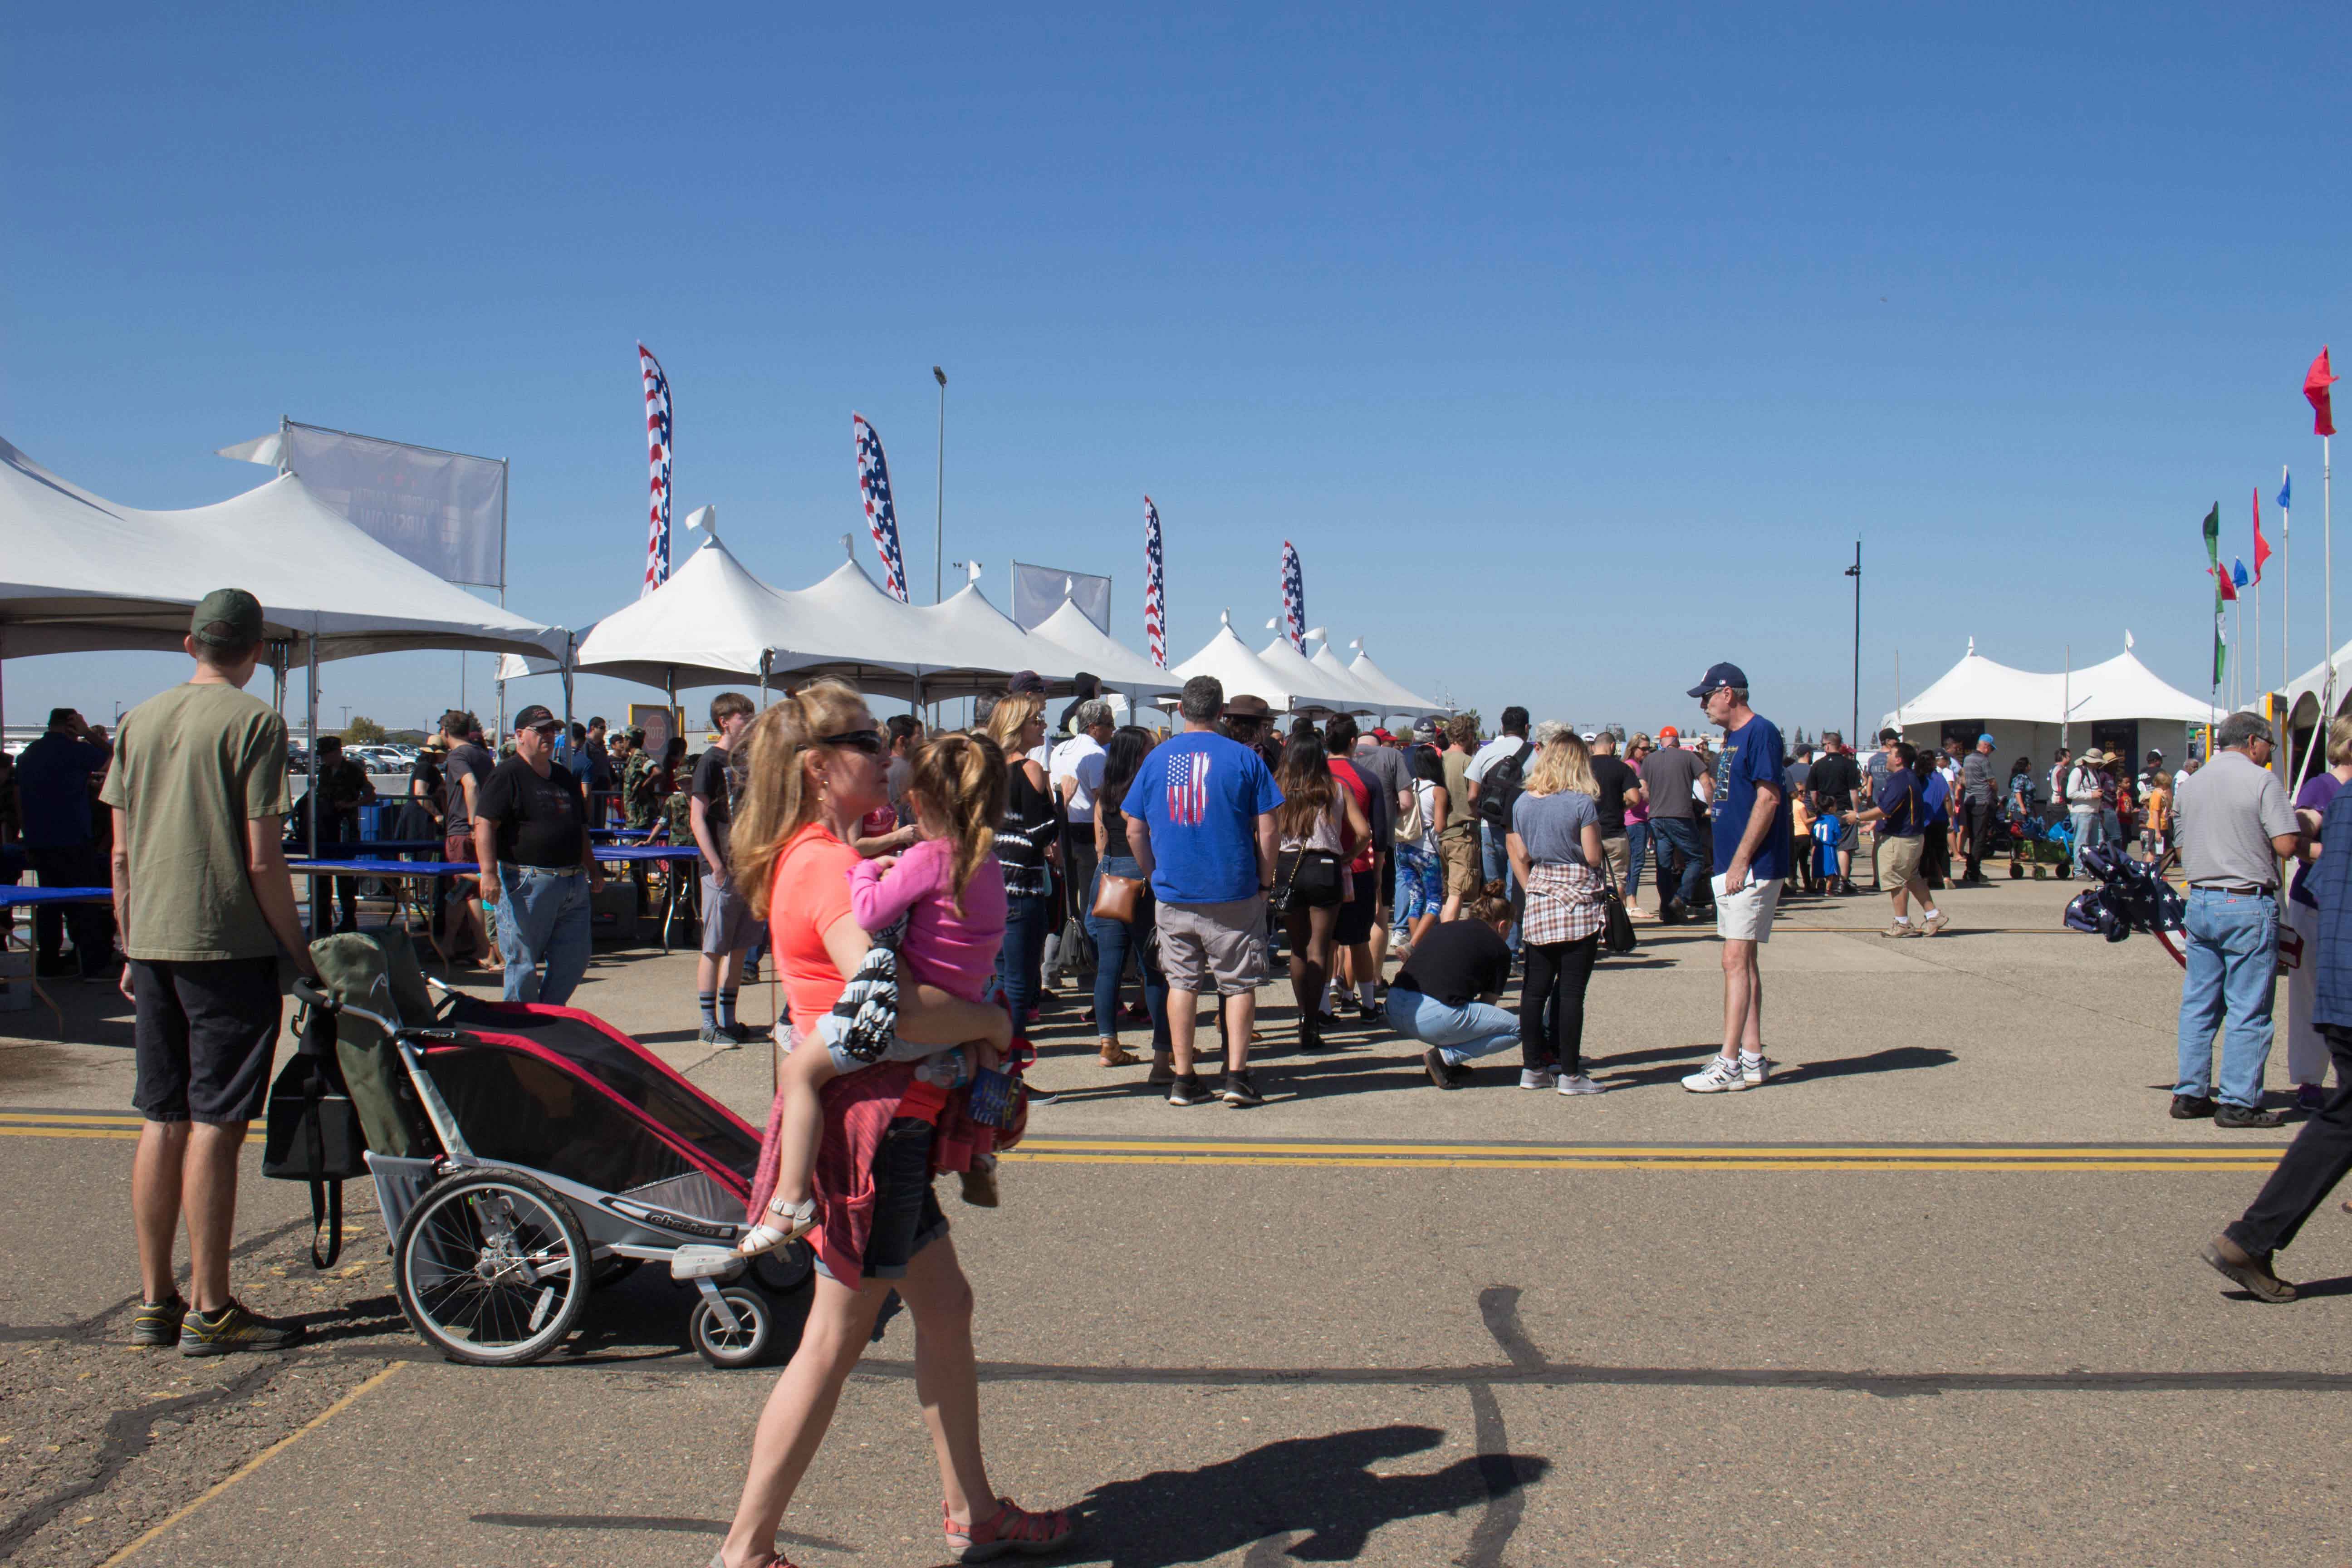 large crowd at air show entrance lined with large white tents and american flags